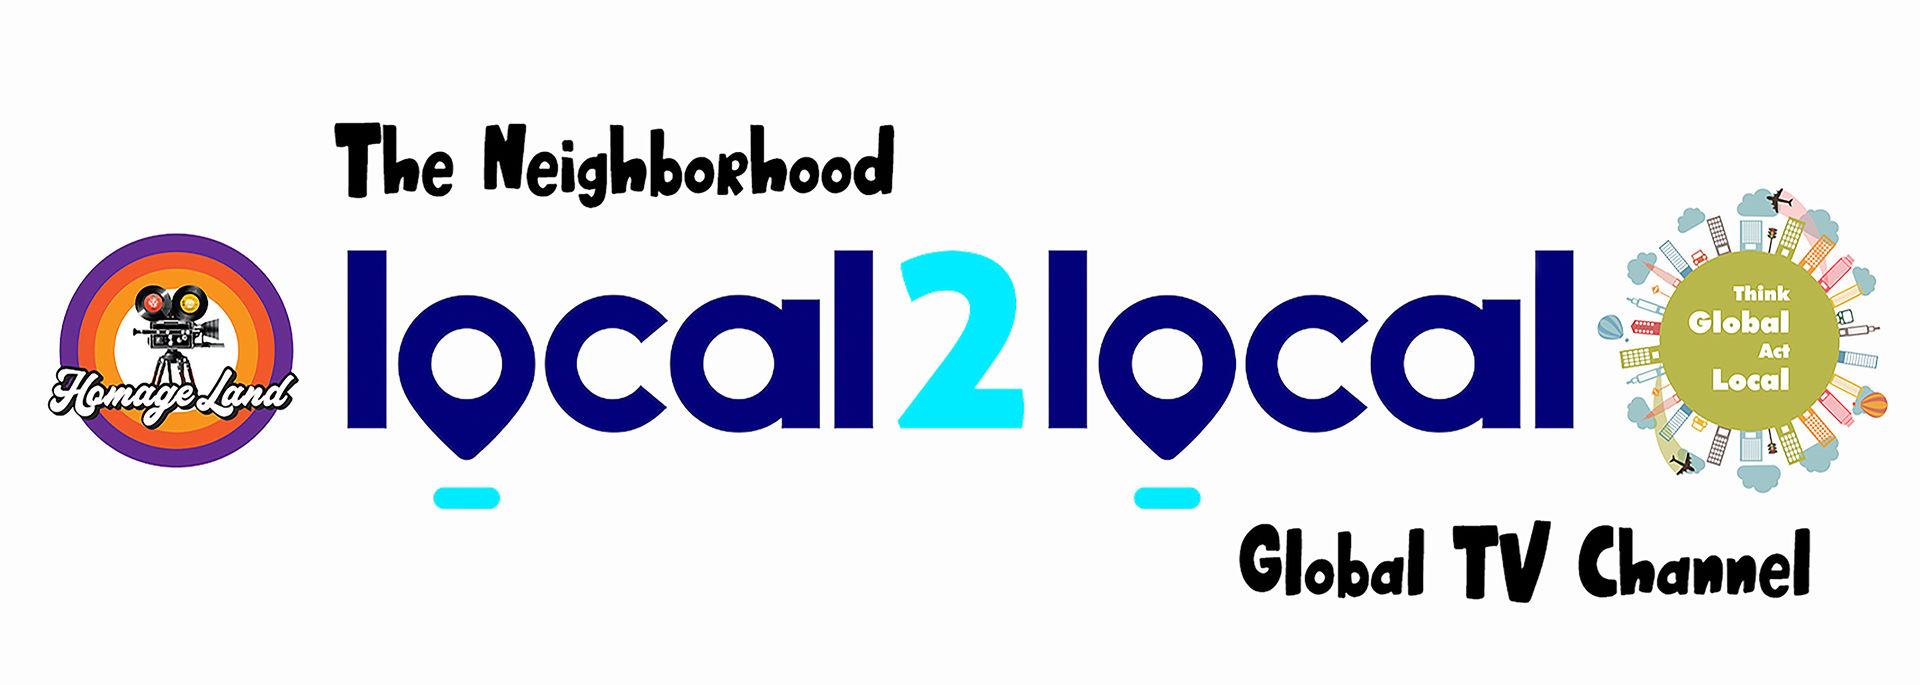 The Neighborhood LOCAL 2 LOCAL Global TV Channel channel